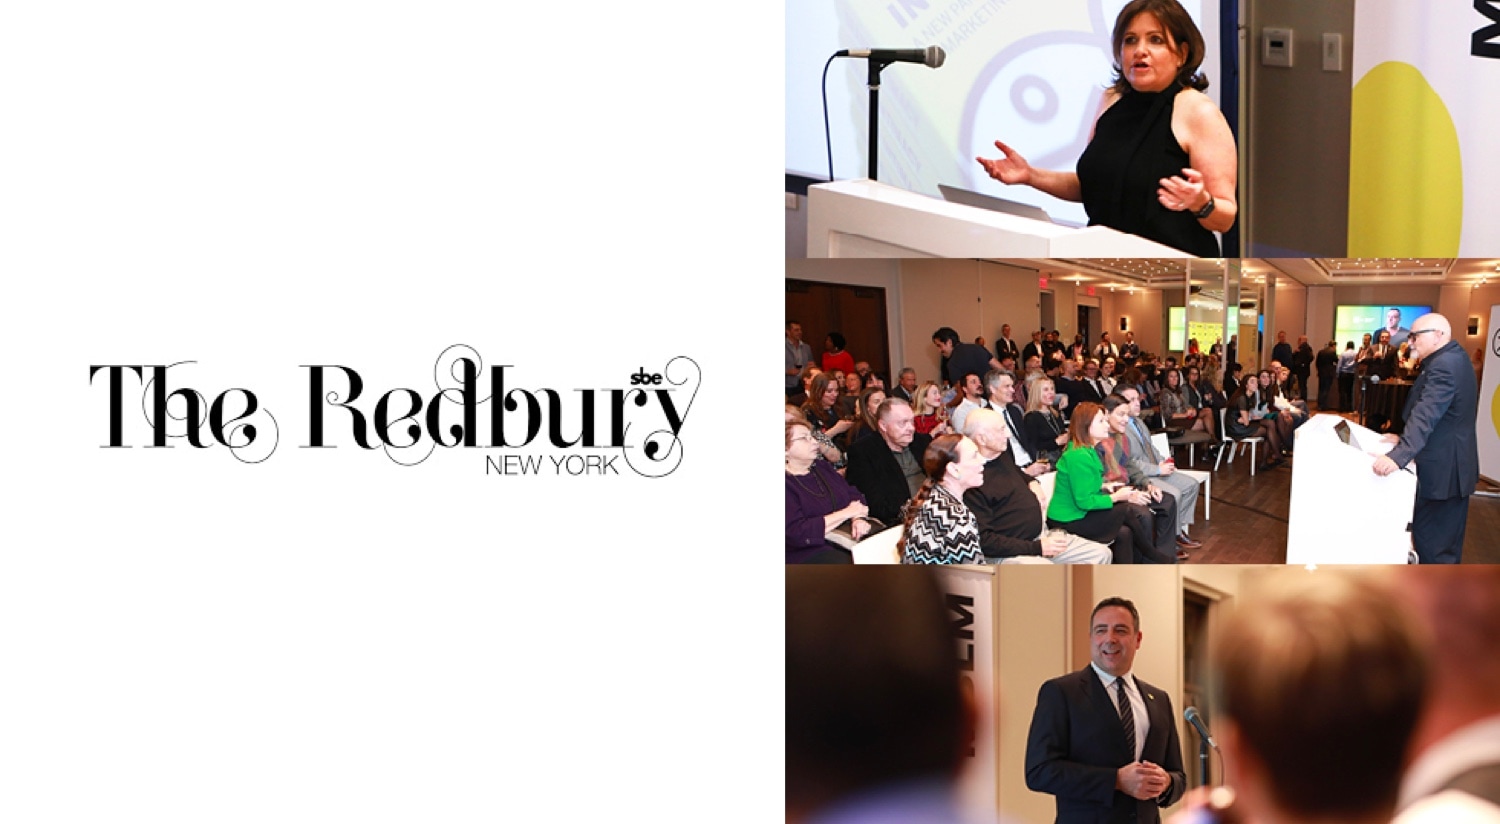 A collage of people at an event showcasing the brand intimacy of The Redbury.